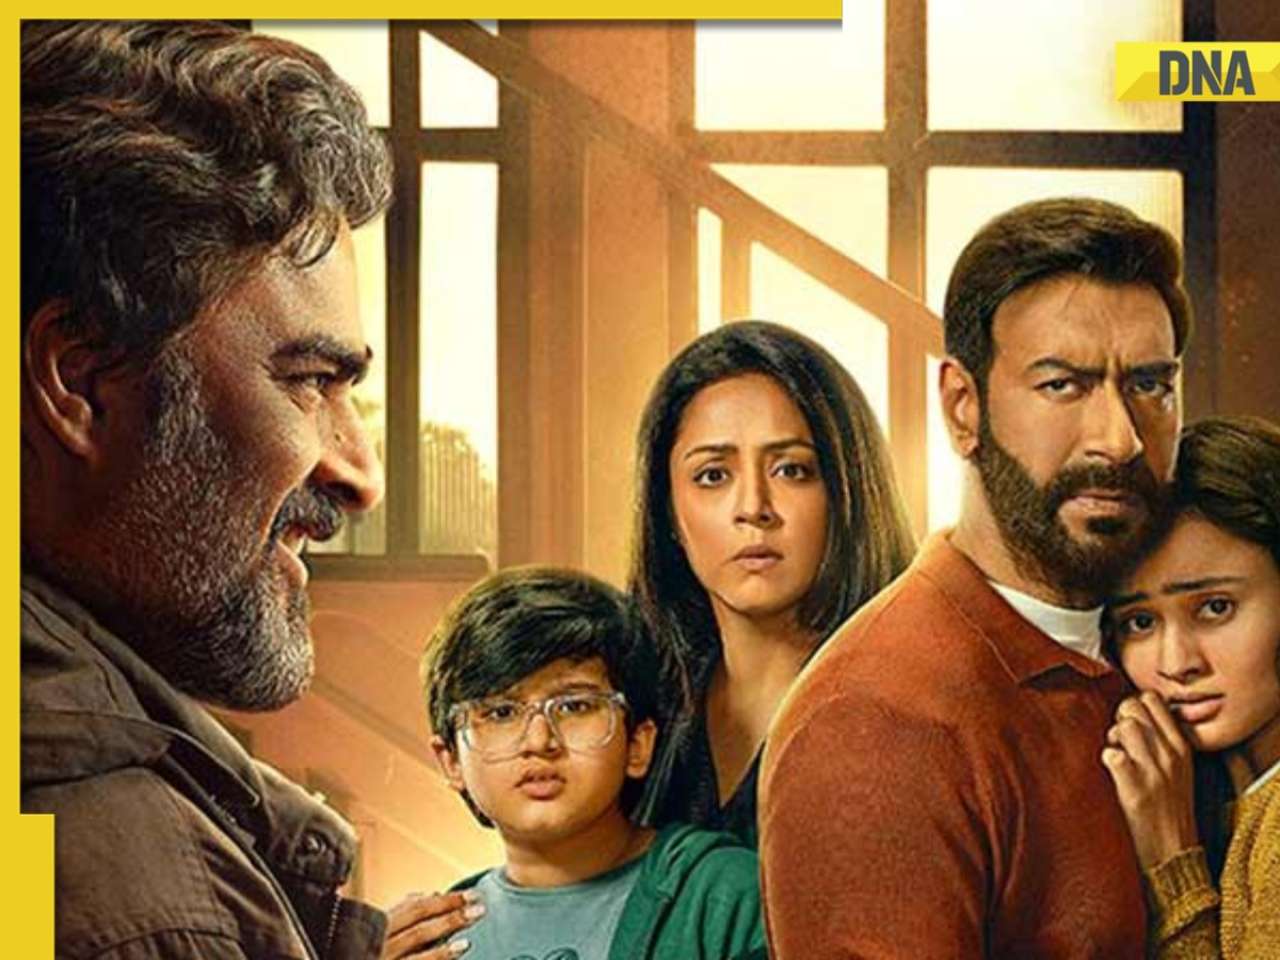 Shaitaan box office collection day 4: Ajay Devgn, R Madhavan film sees major drop on Monday, collects Rs 7 crore